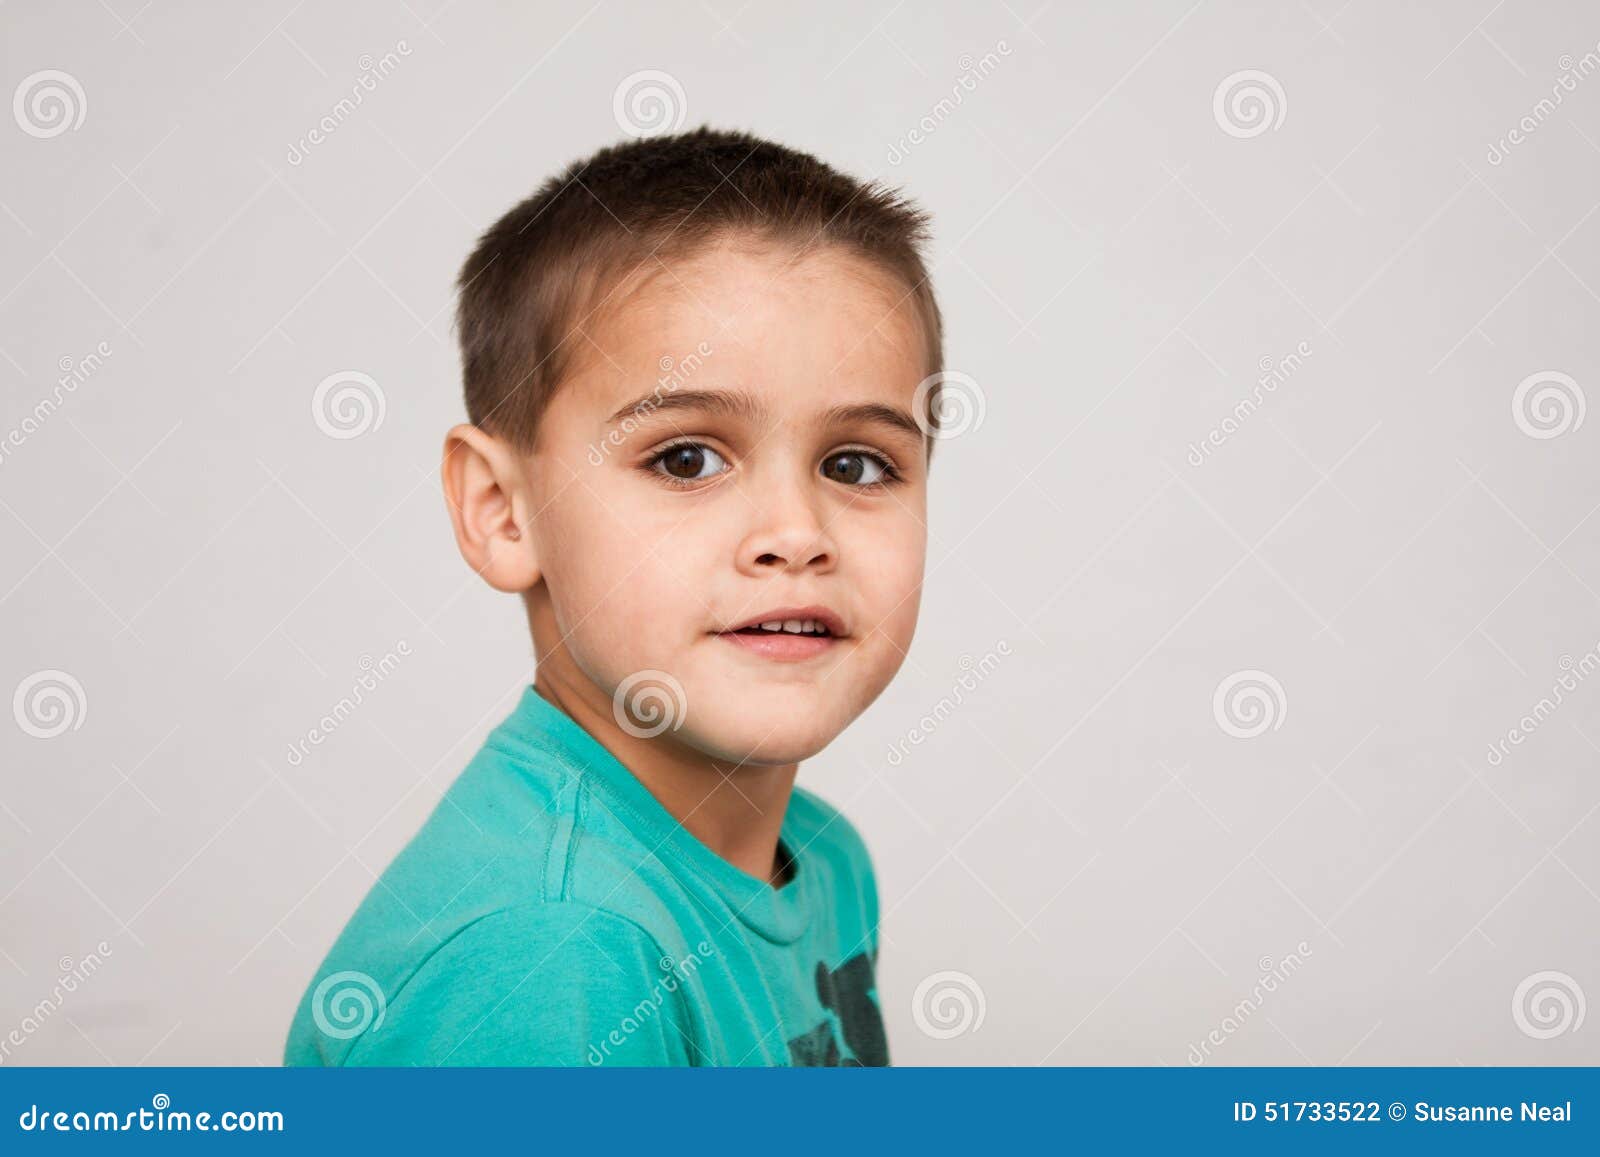 Portrait Of Cute Four Year Old Boy With Short Haircut Stock Photo